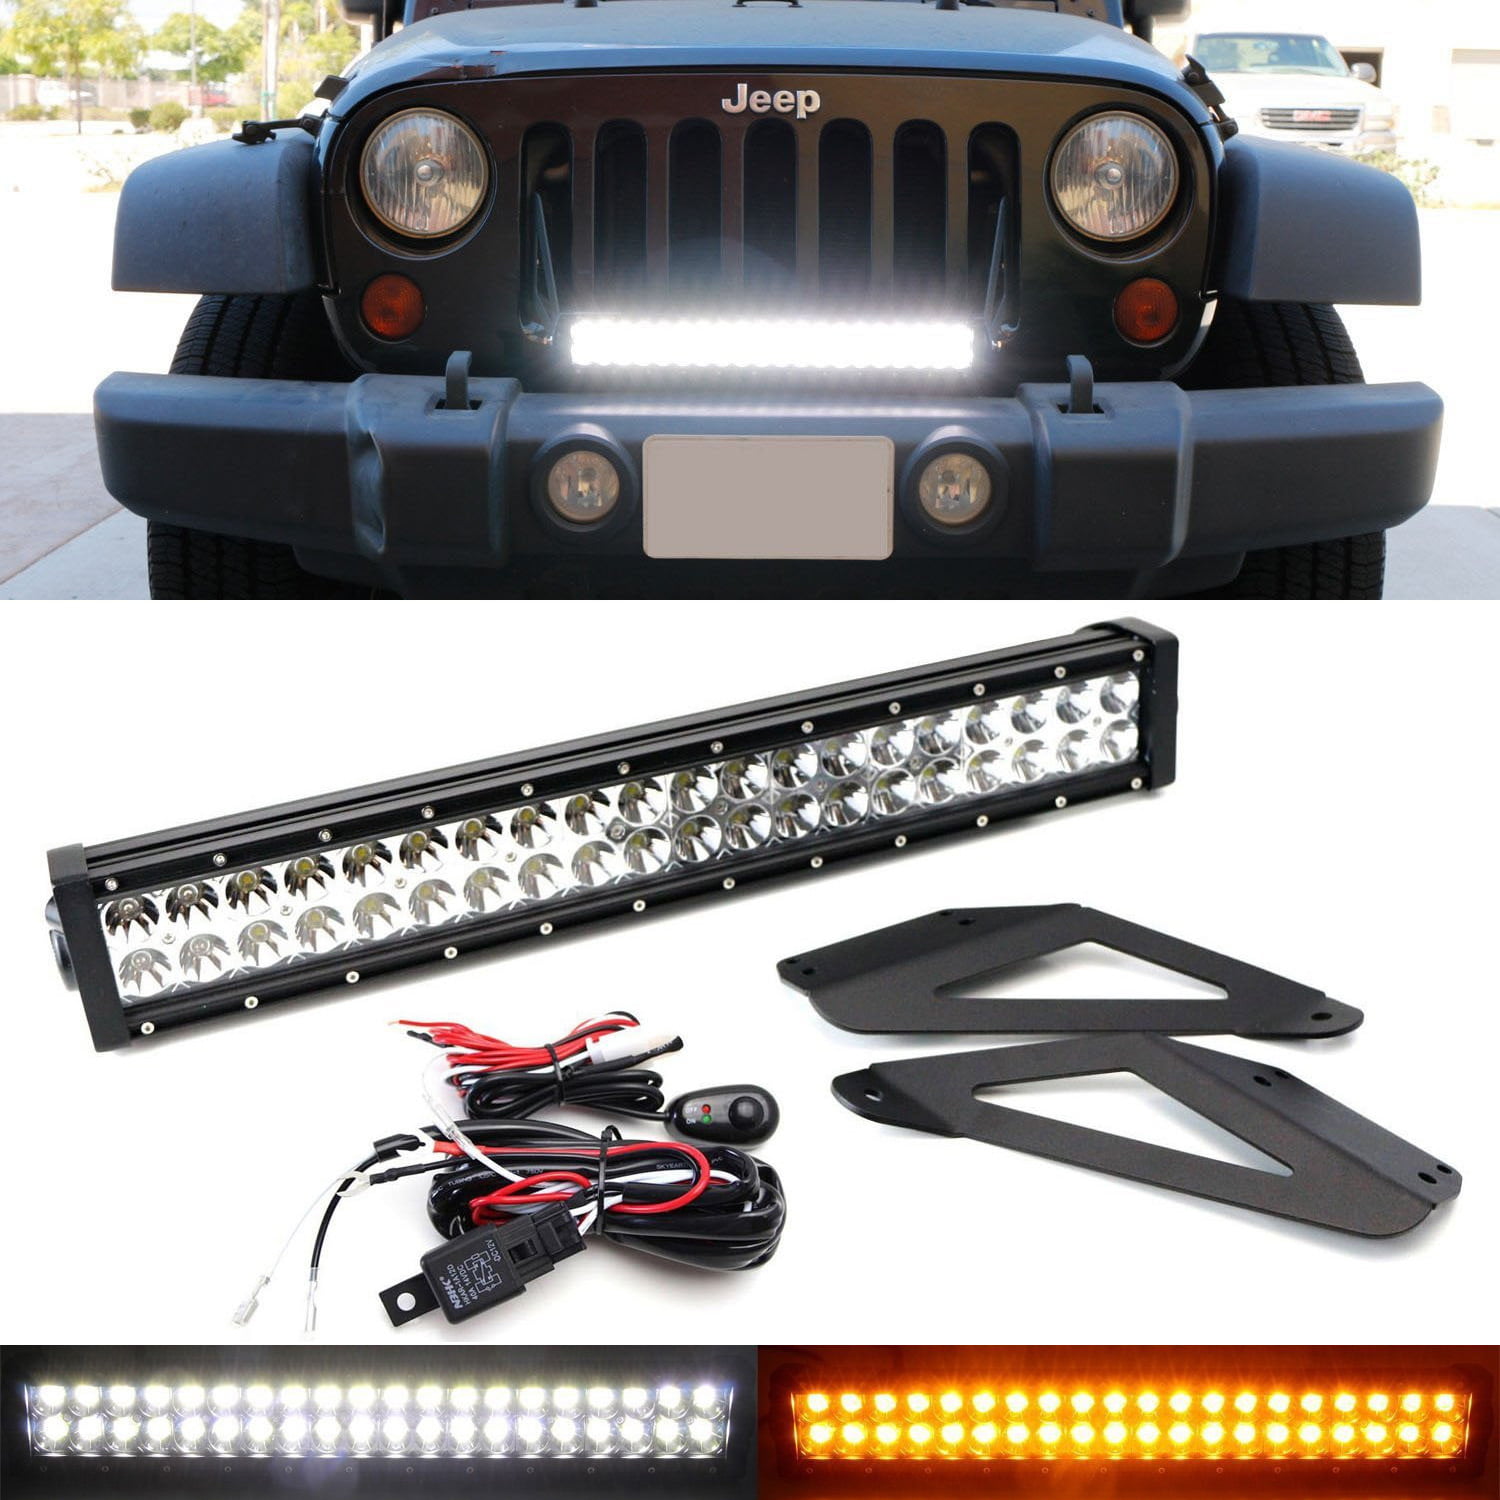 iJDMTOY Front Grille Mount 20-Inch Dual Color LED Light Bar Compatible with  Jeep 2007-17 Wrangler JK, Includes (1) 120W White/Amber LED Lightbar, Grill  Front Mount Brackets & On/Off Switch Wiring Kit -